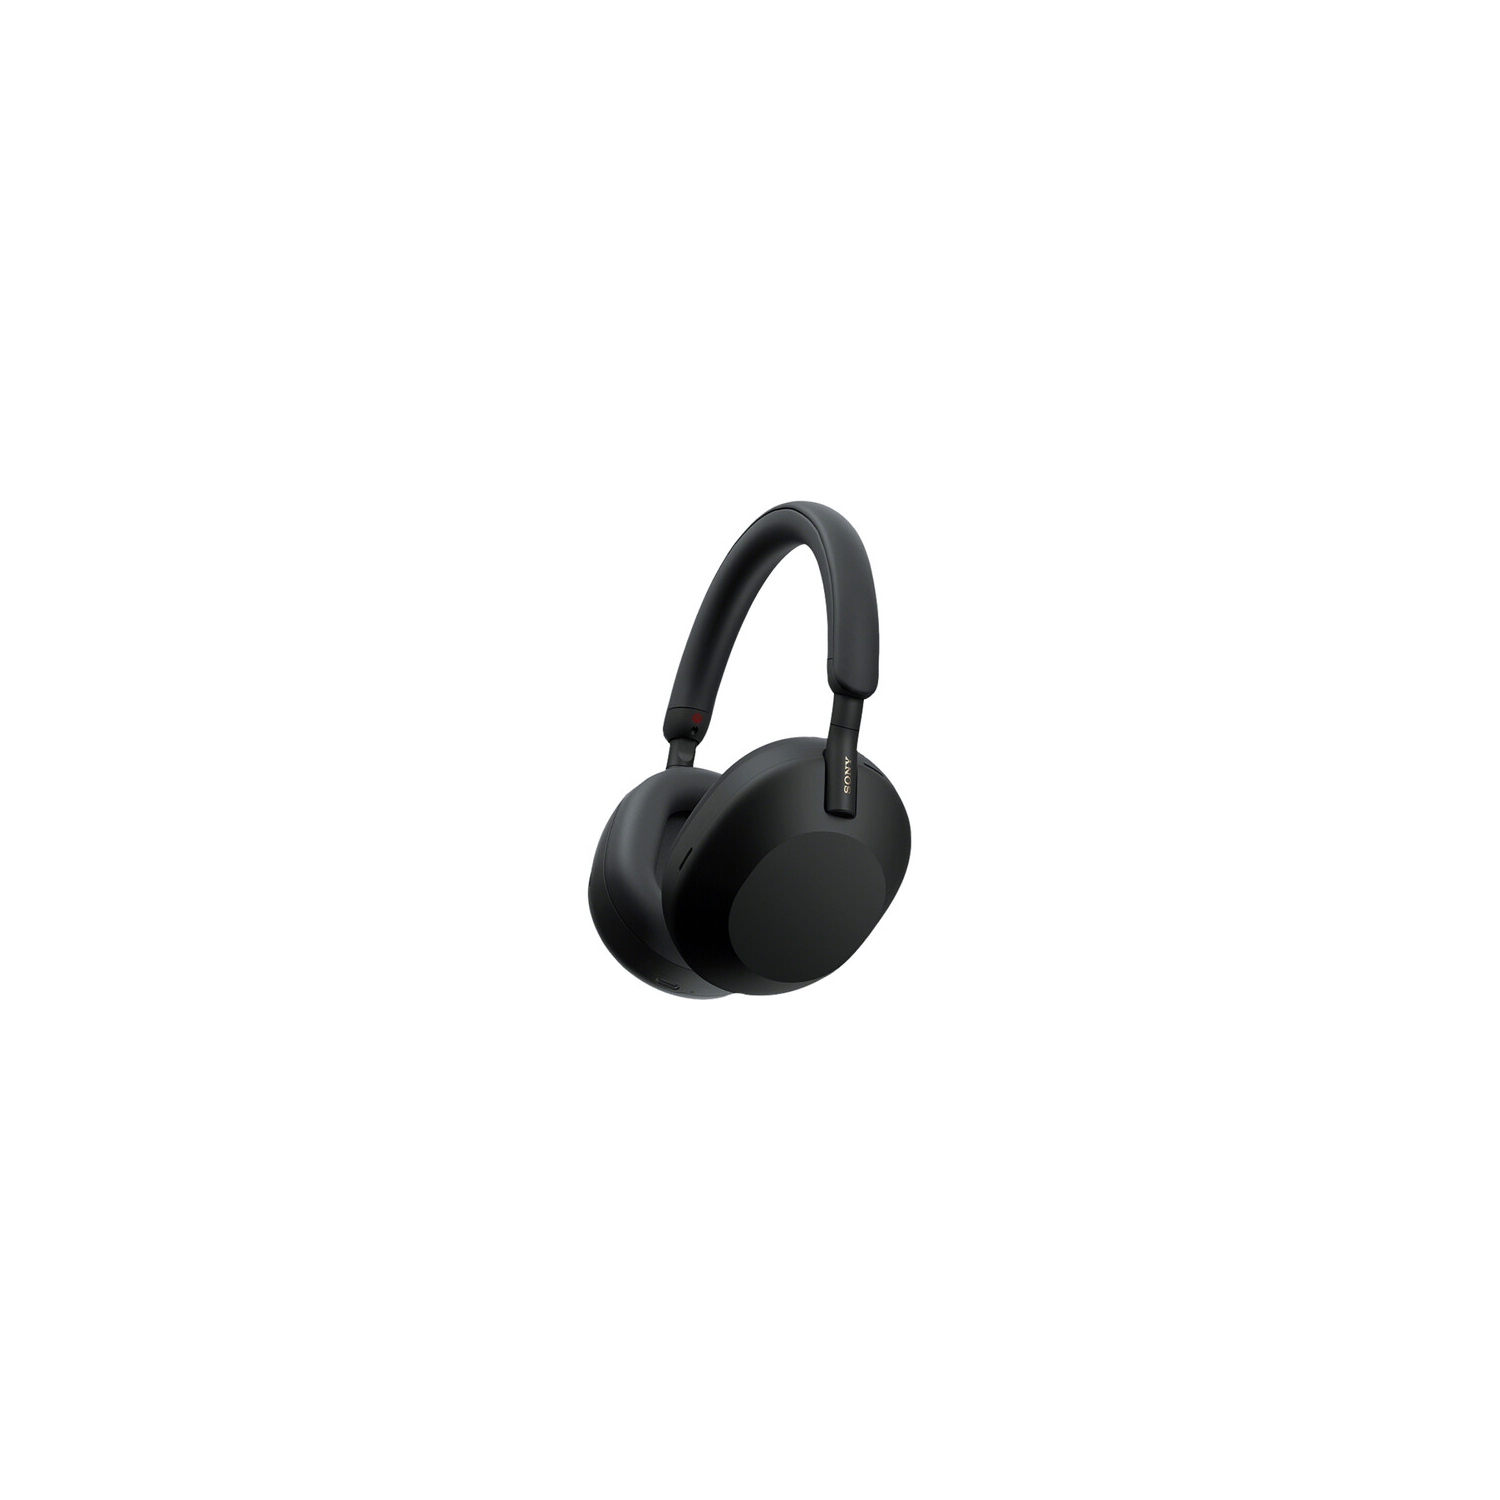 Refurbished (Good) - Sony WH-1000XM5 Noise-Canceling Wireless Over-Ear Headphones (Black)